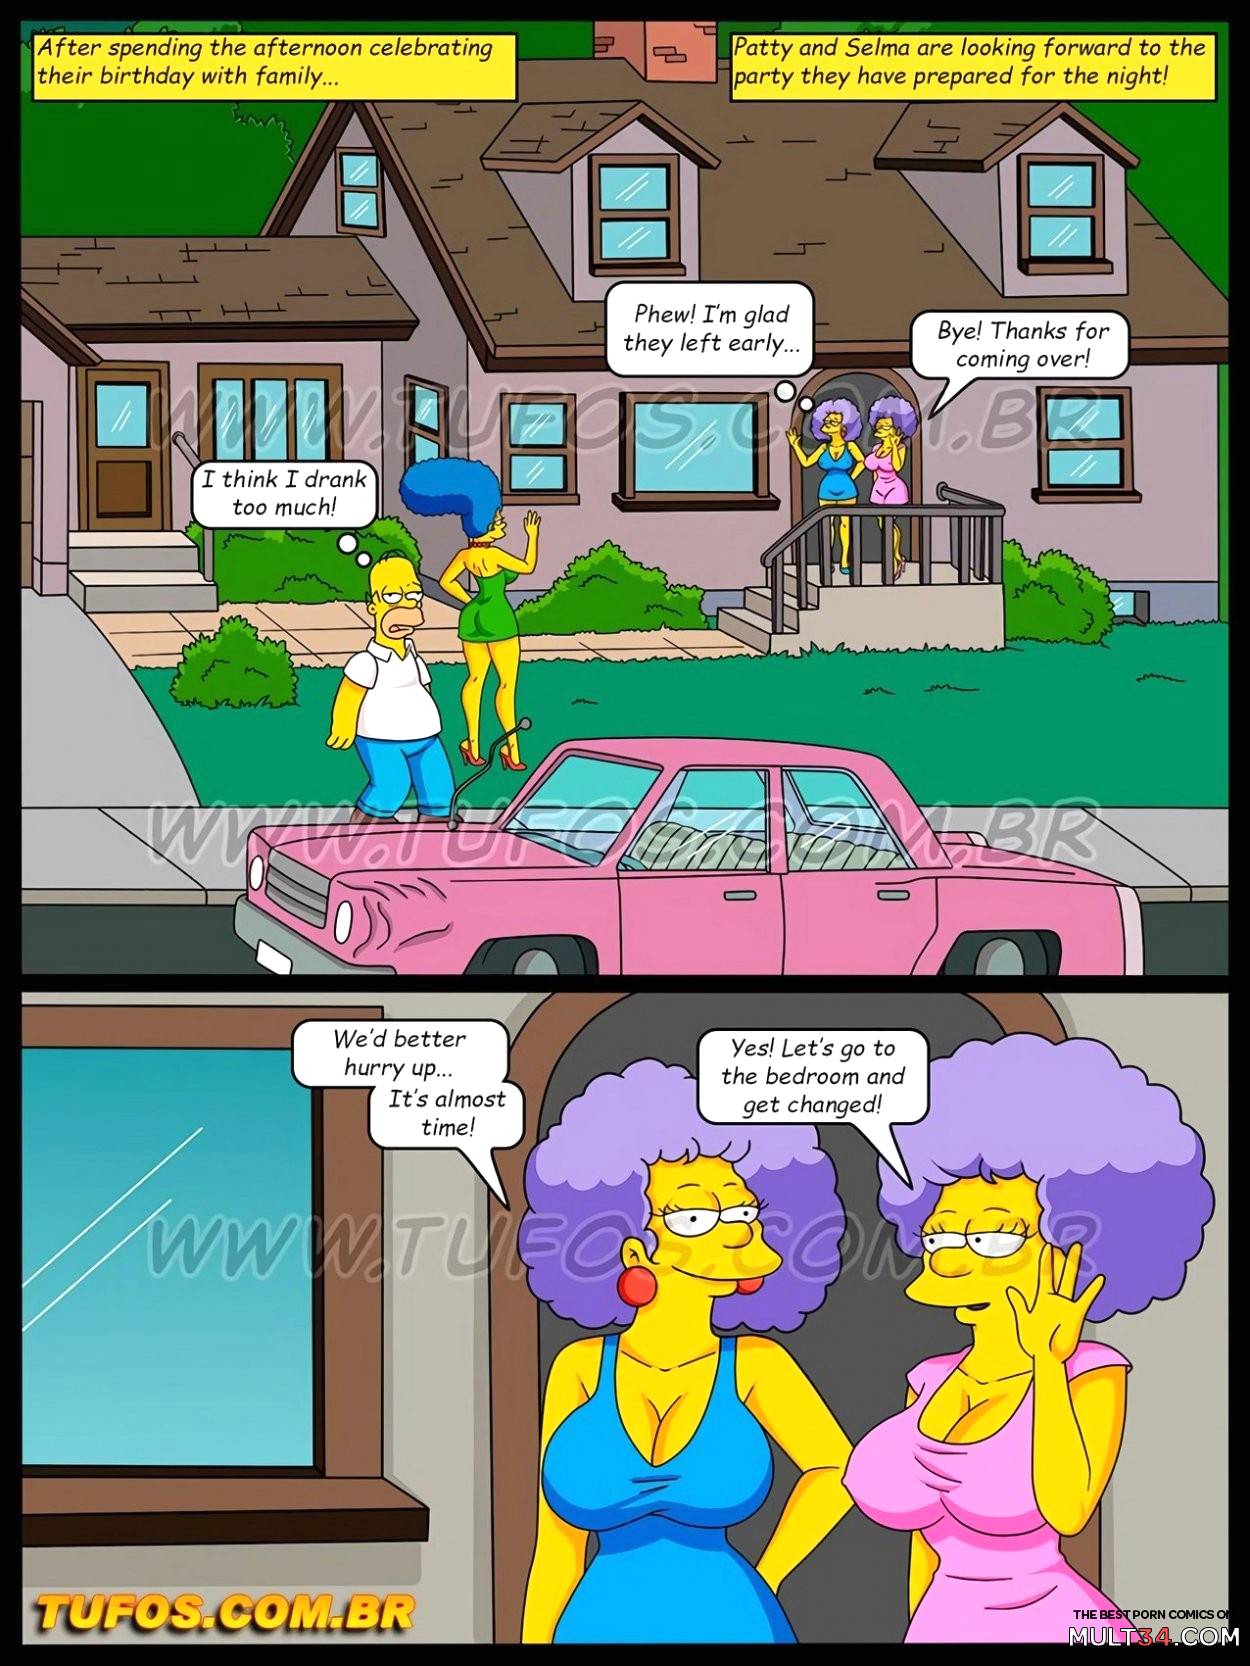 The Simpsons 22 - The Birthday Bash page 2